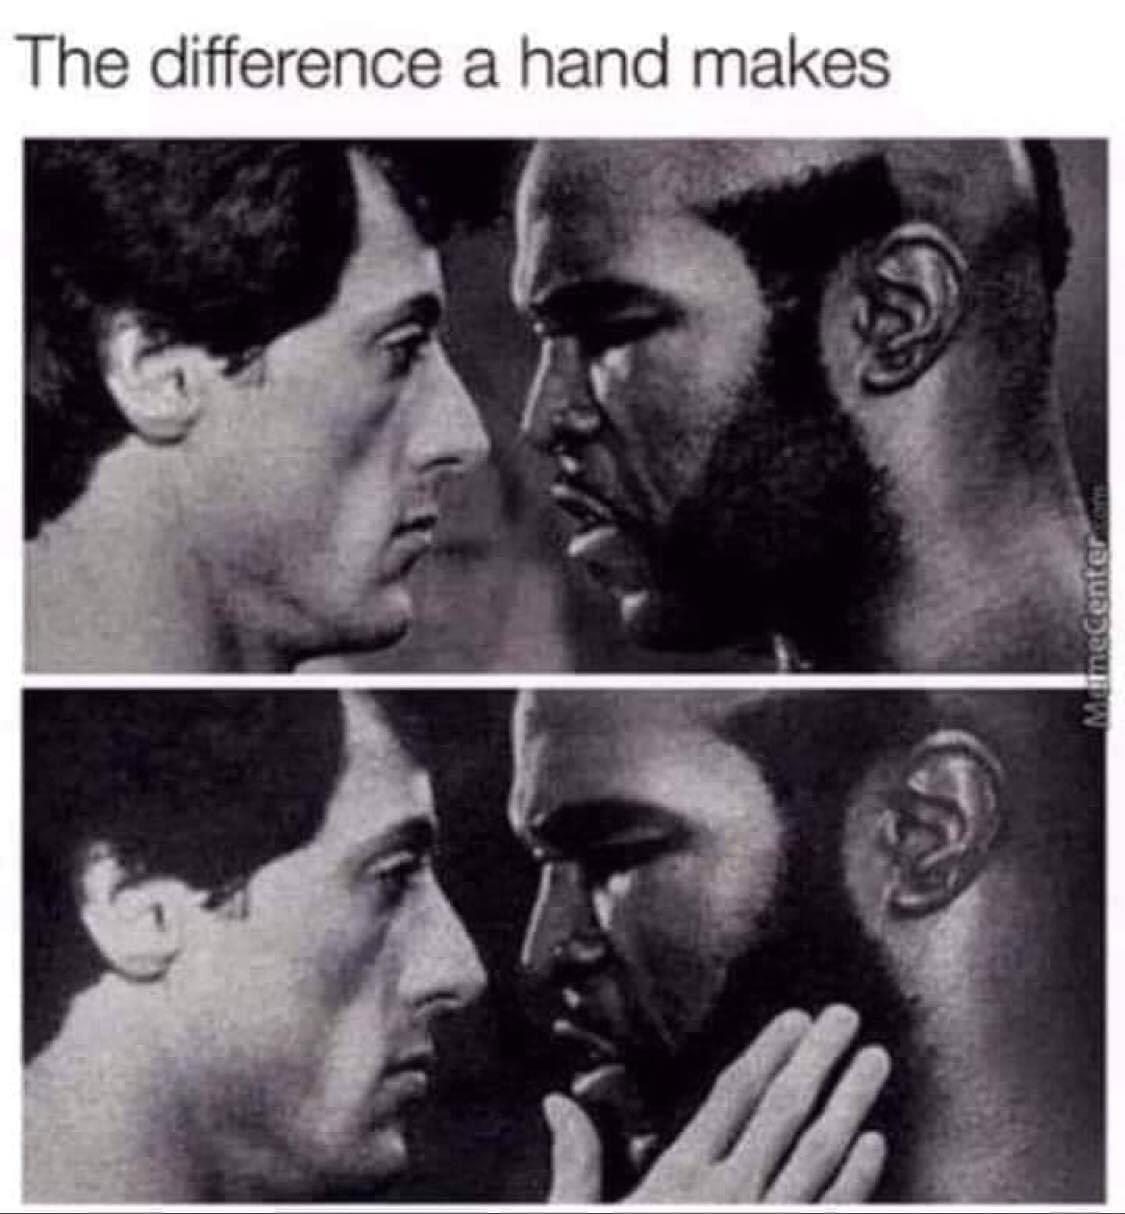 funny memes - hand changes everything meme - The difference a hand makes Memecenter